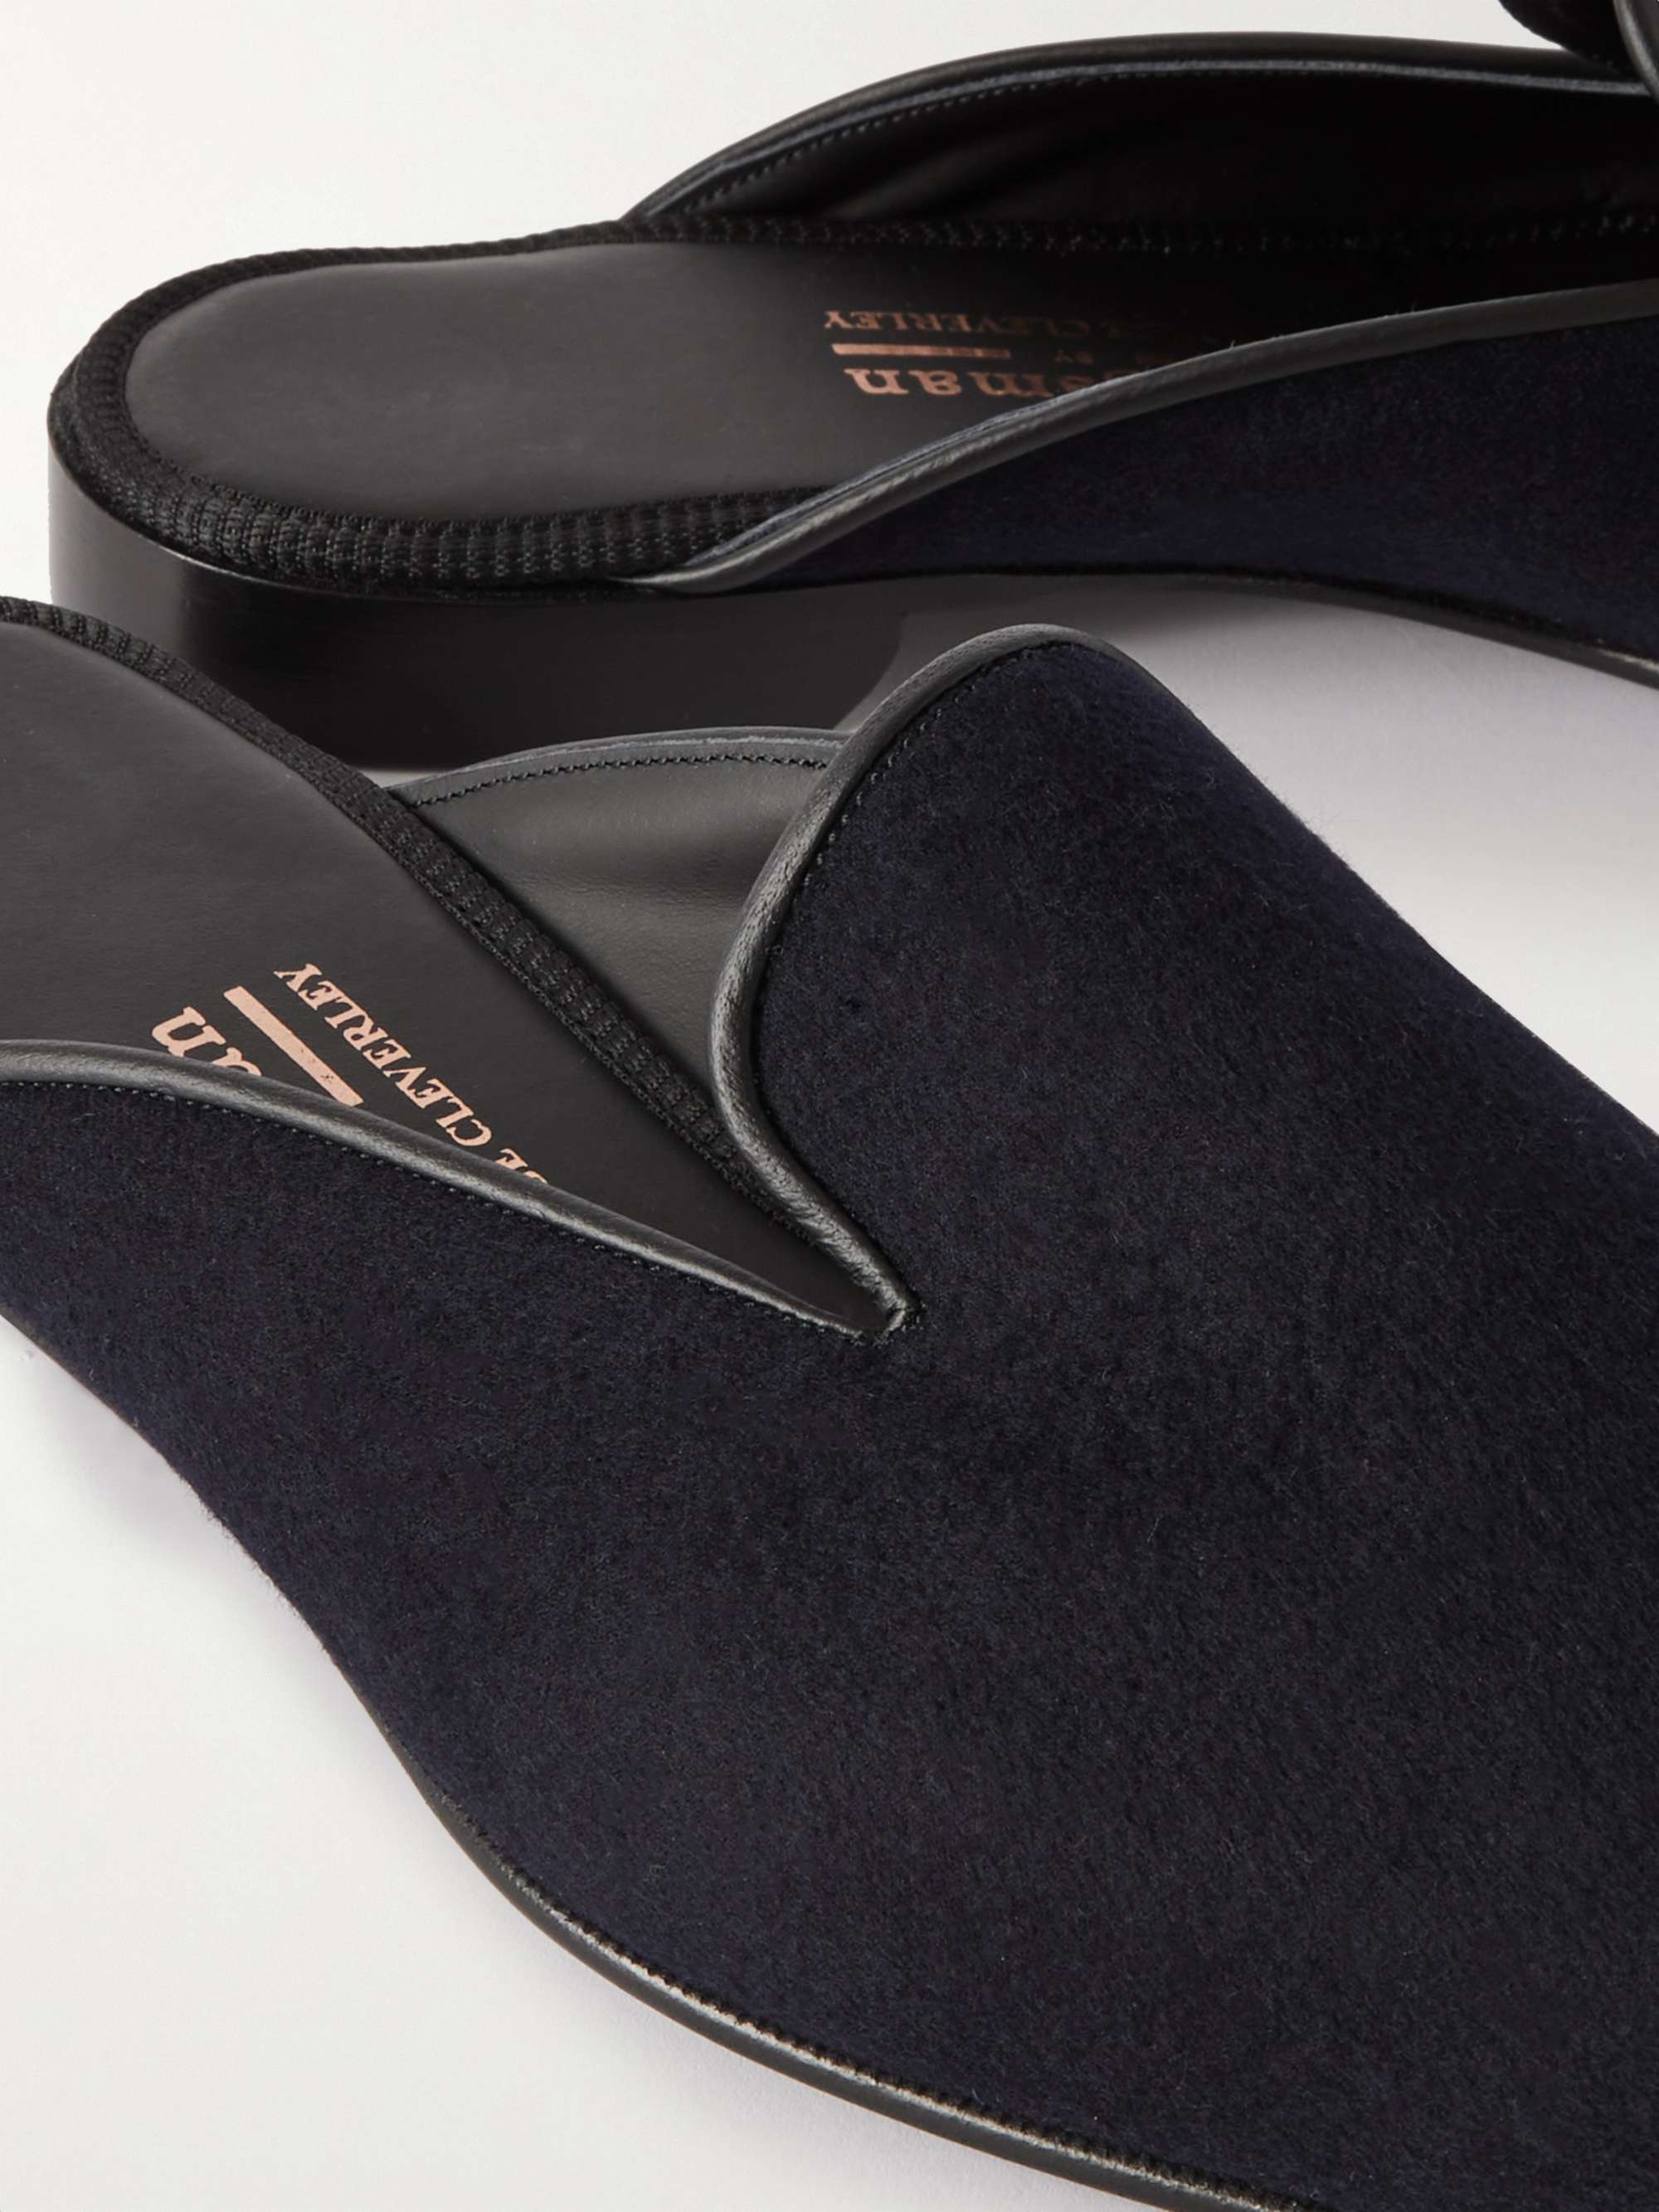 KINGSMAN + George Cleverley Leather-Trimmed Cashmere Slippers